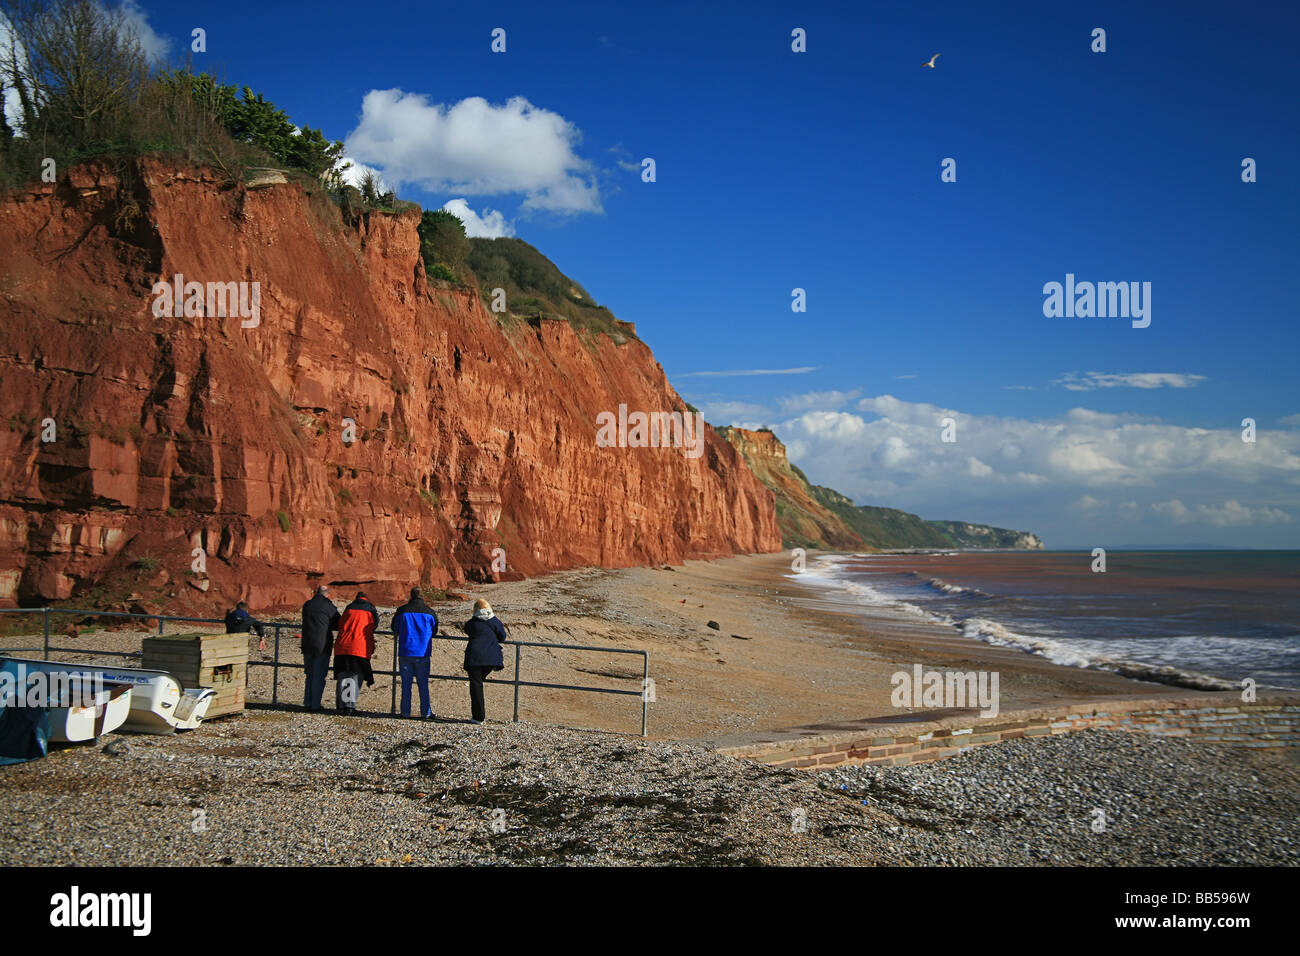 The red sandstone cliffs of the 'Jurassic Coast' at Sidmouth, Devon, England, UK Stock Photo